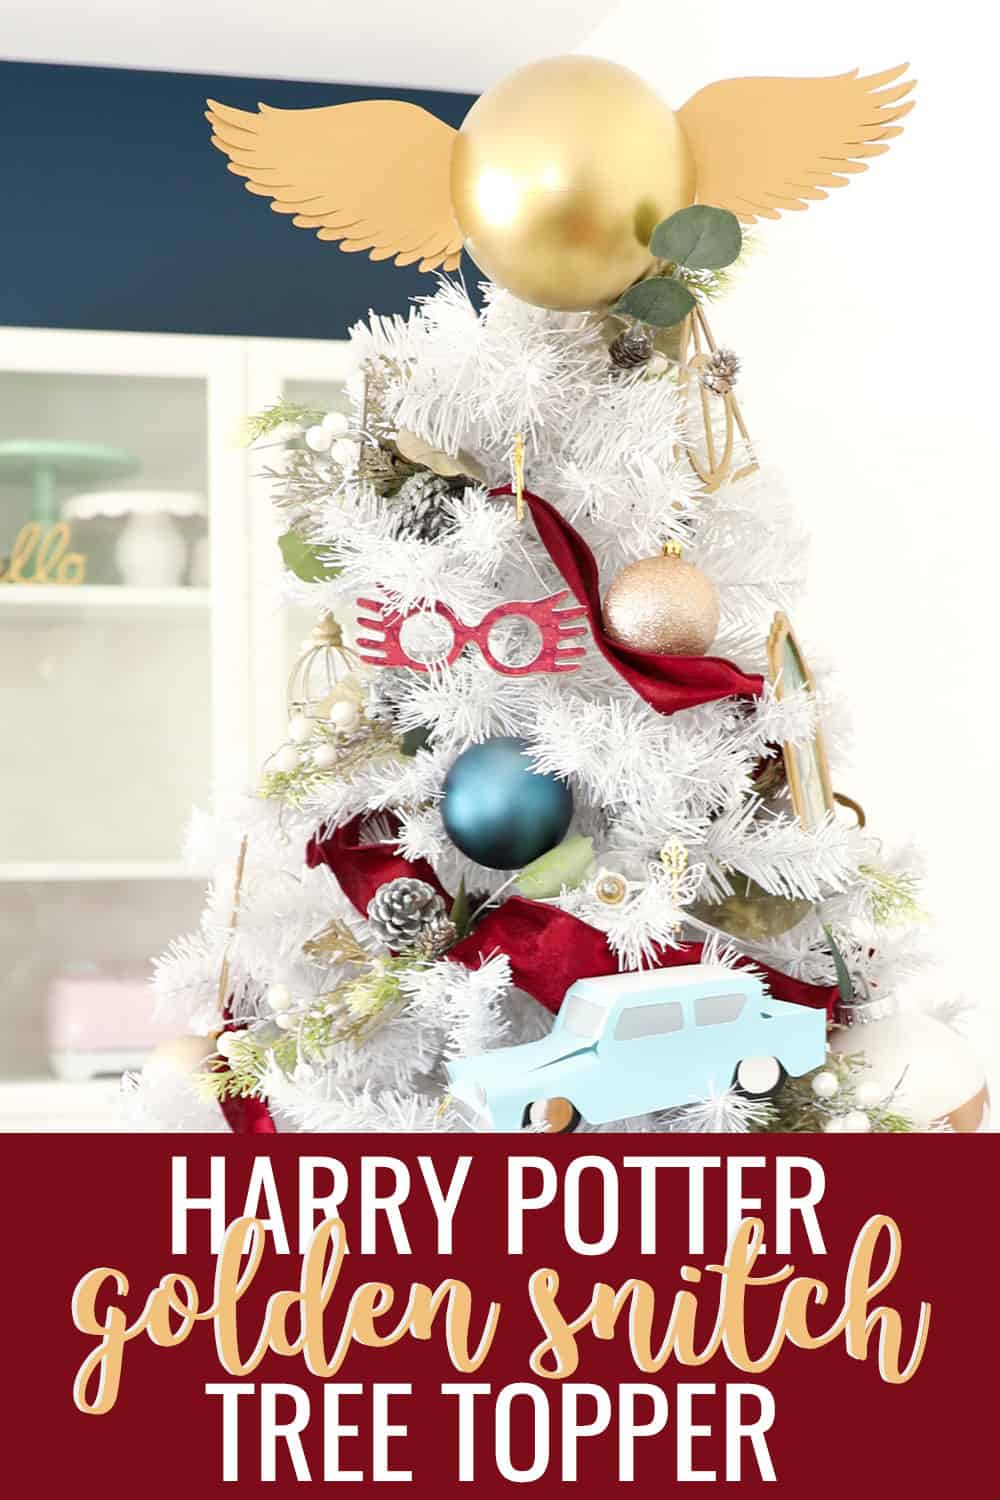 Golden Snitch Harry Potter Tree Topper